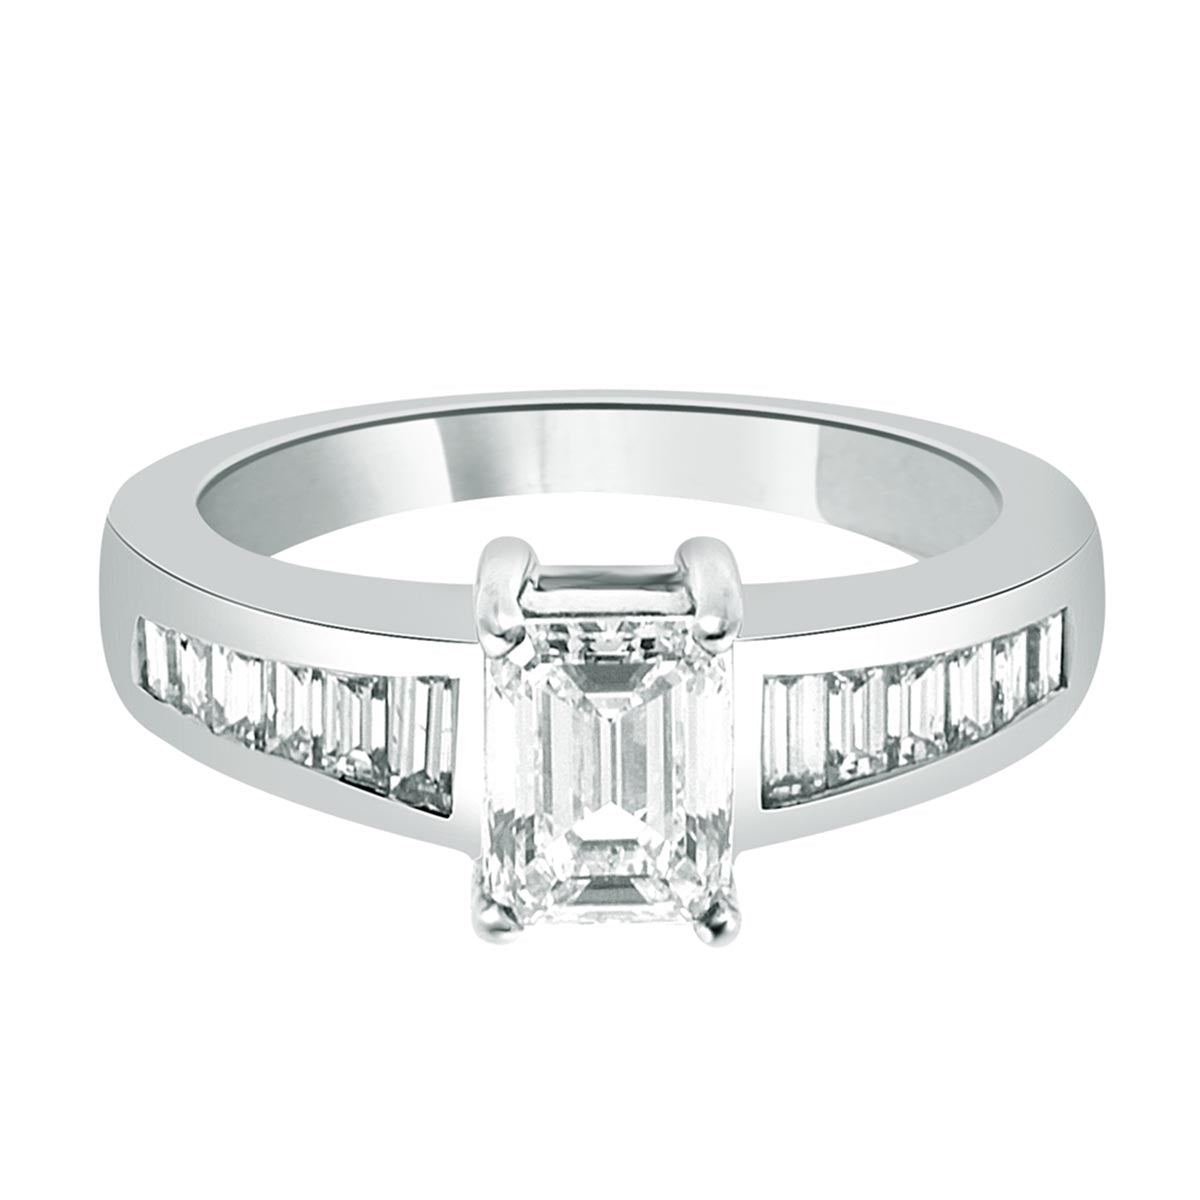 Emerald Cut Engagement Ring made from platinum